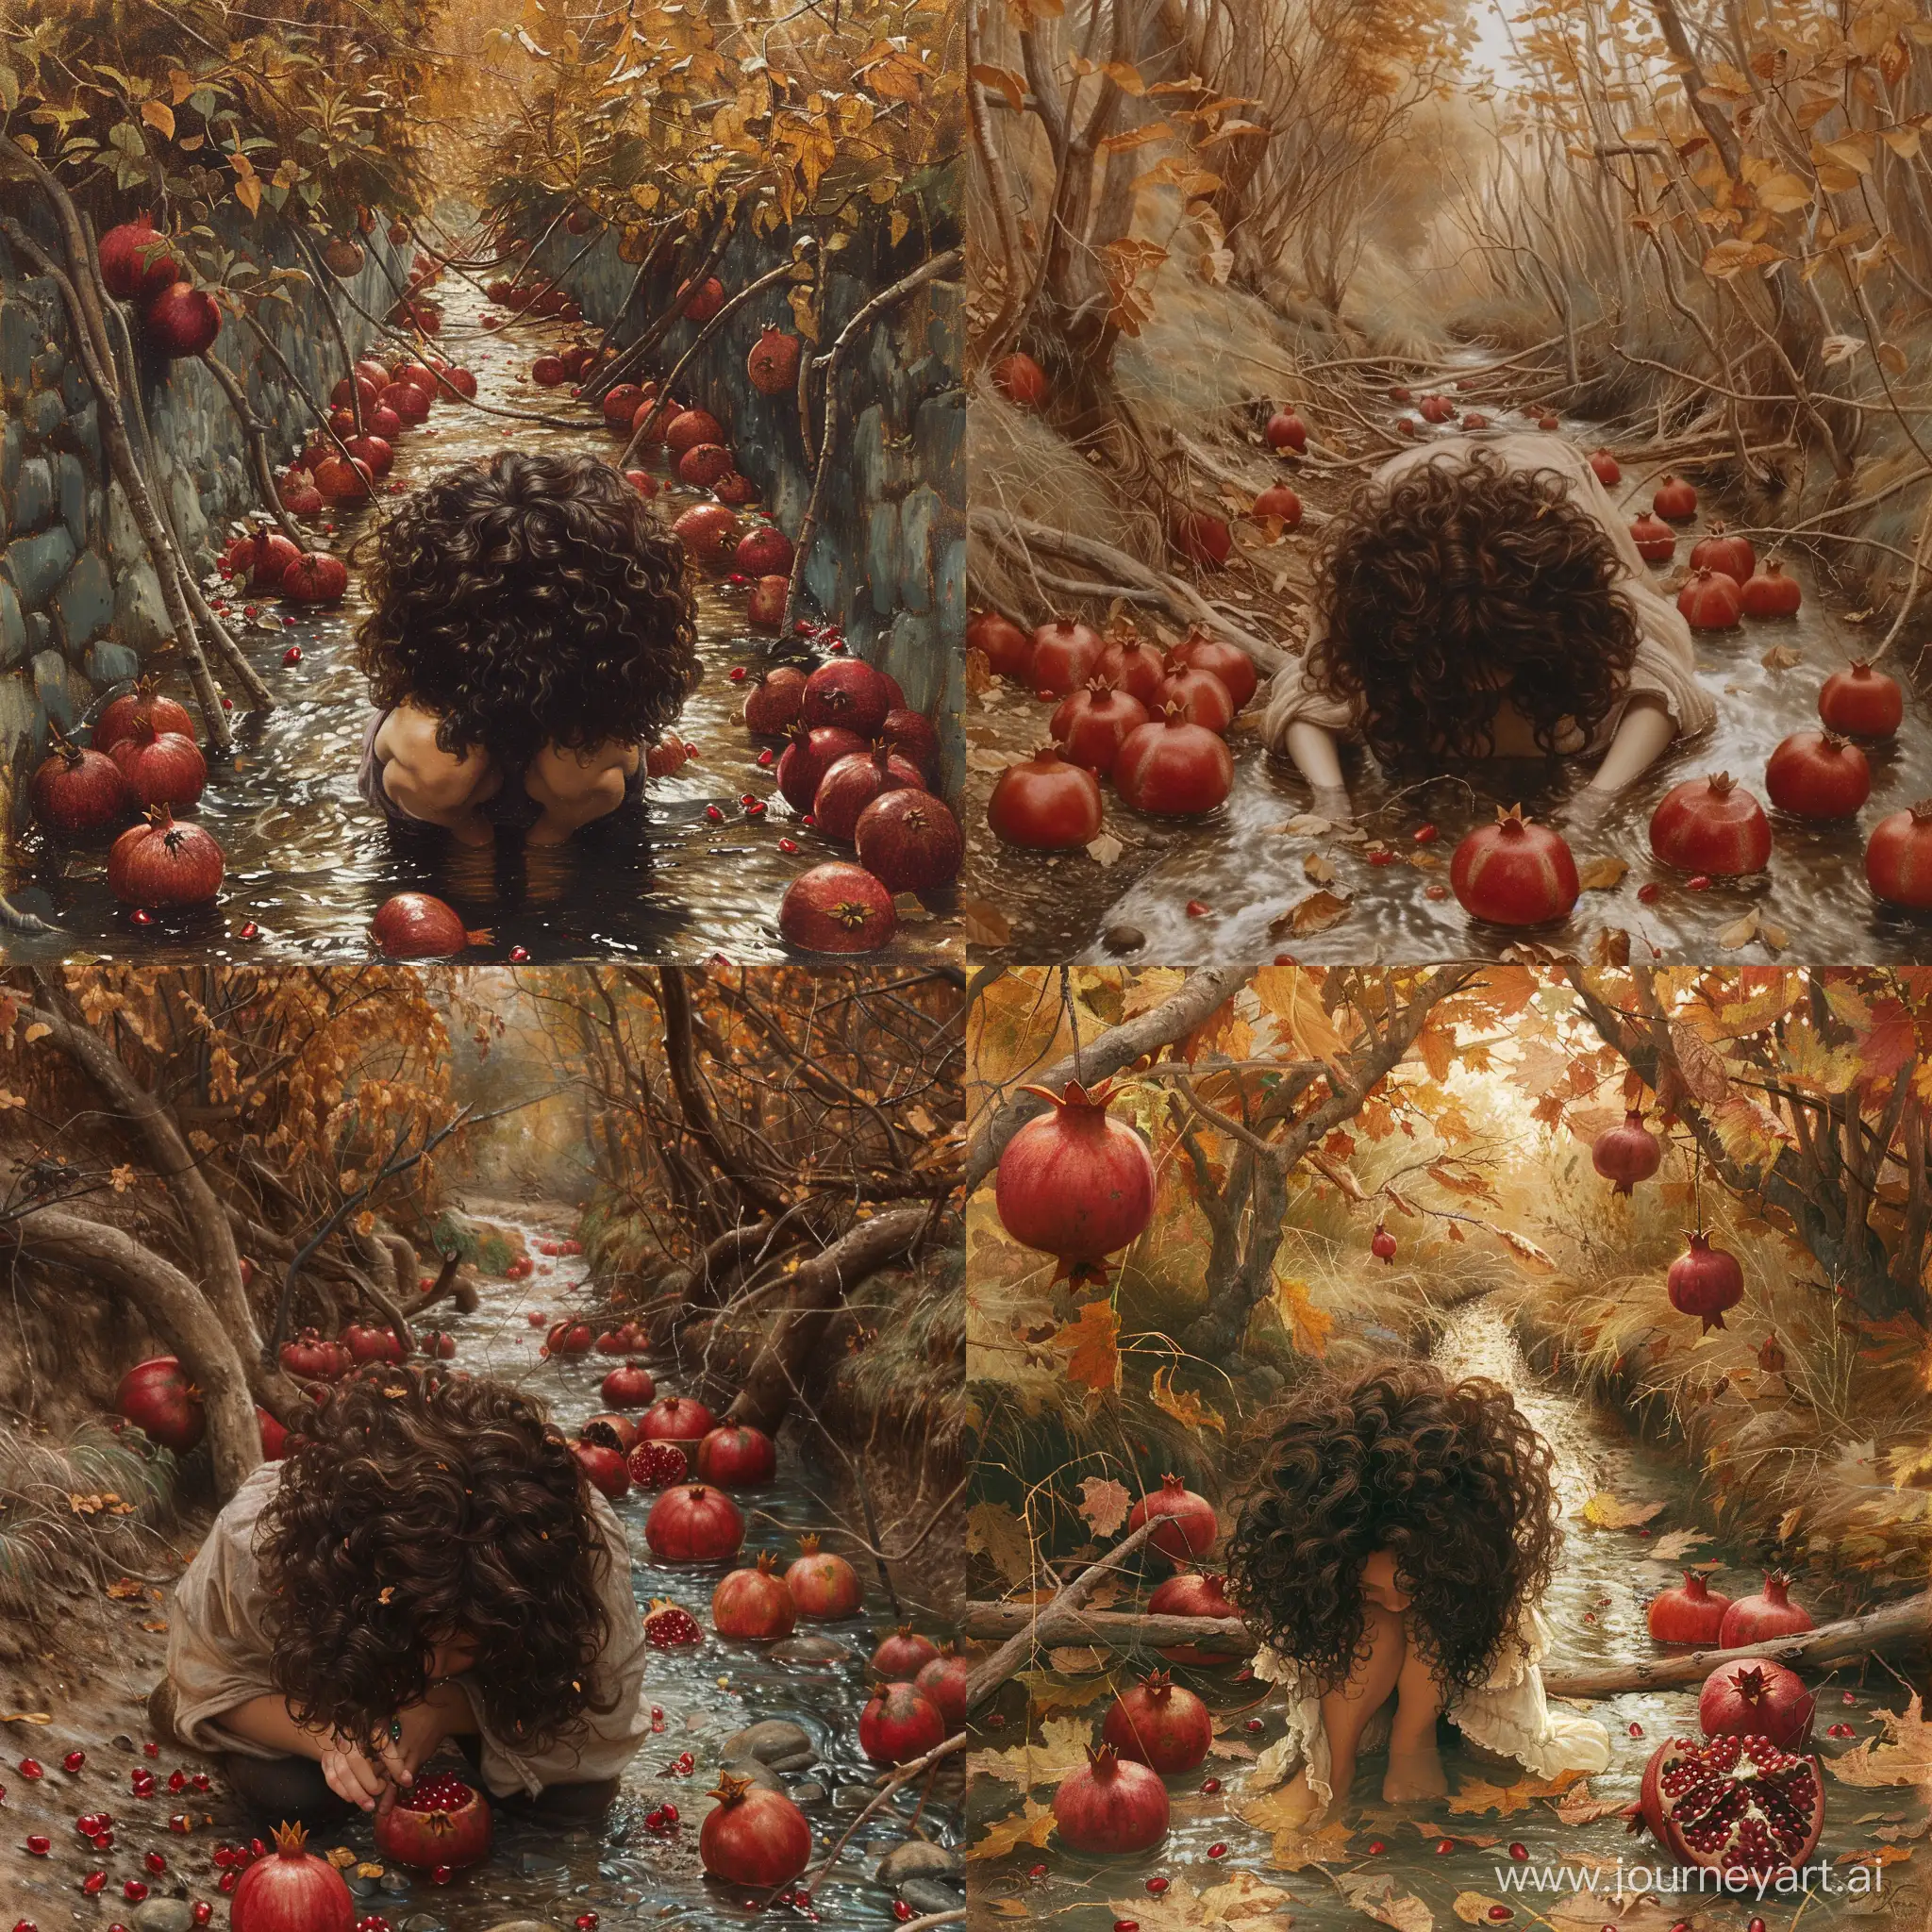 Pomegranate trees have fallen by the side of a narrow stream in the autumn season, and a girl with voluminous curly dark brown hair is sitting while her head is down and her legs are bent in the stream.